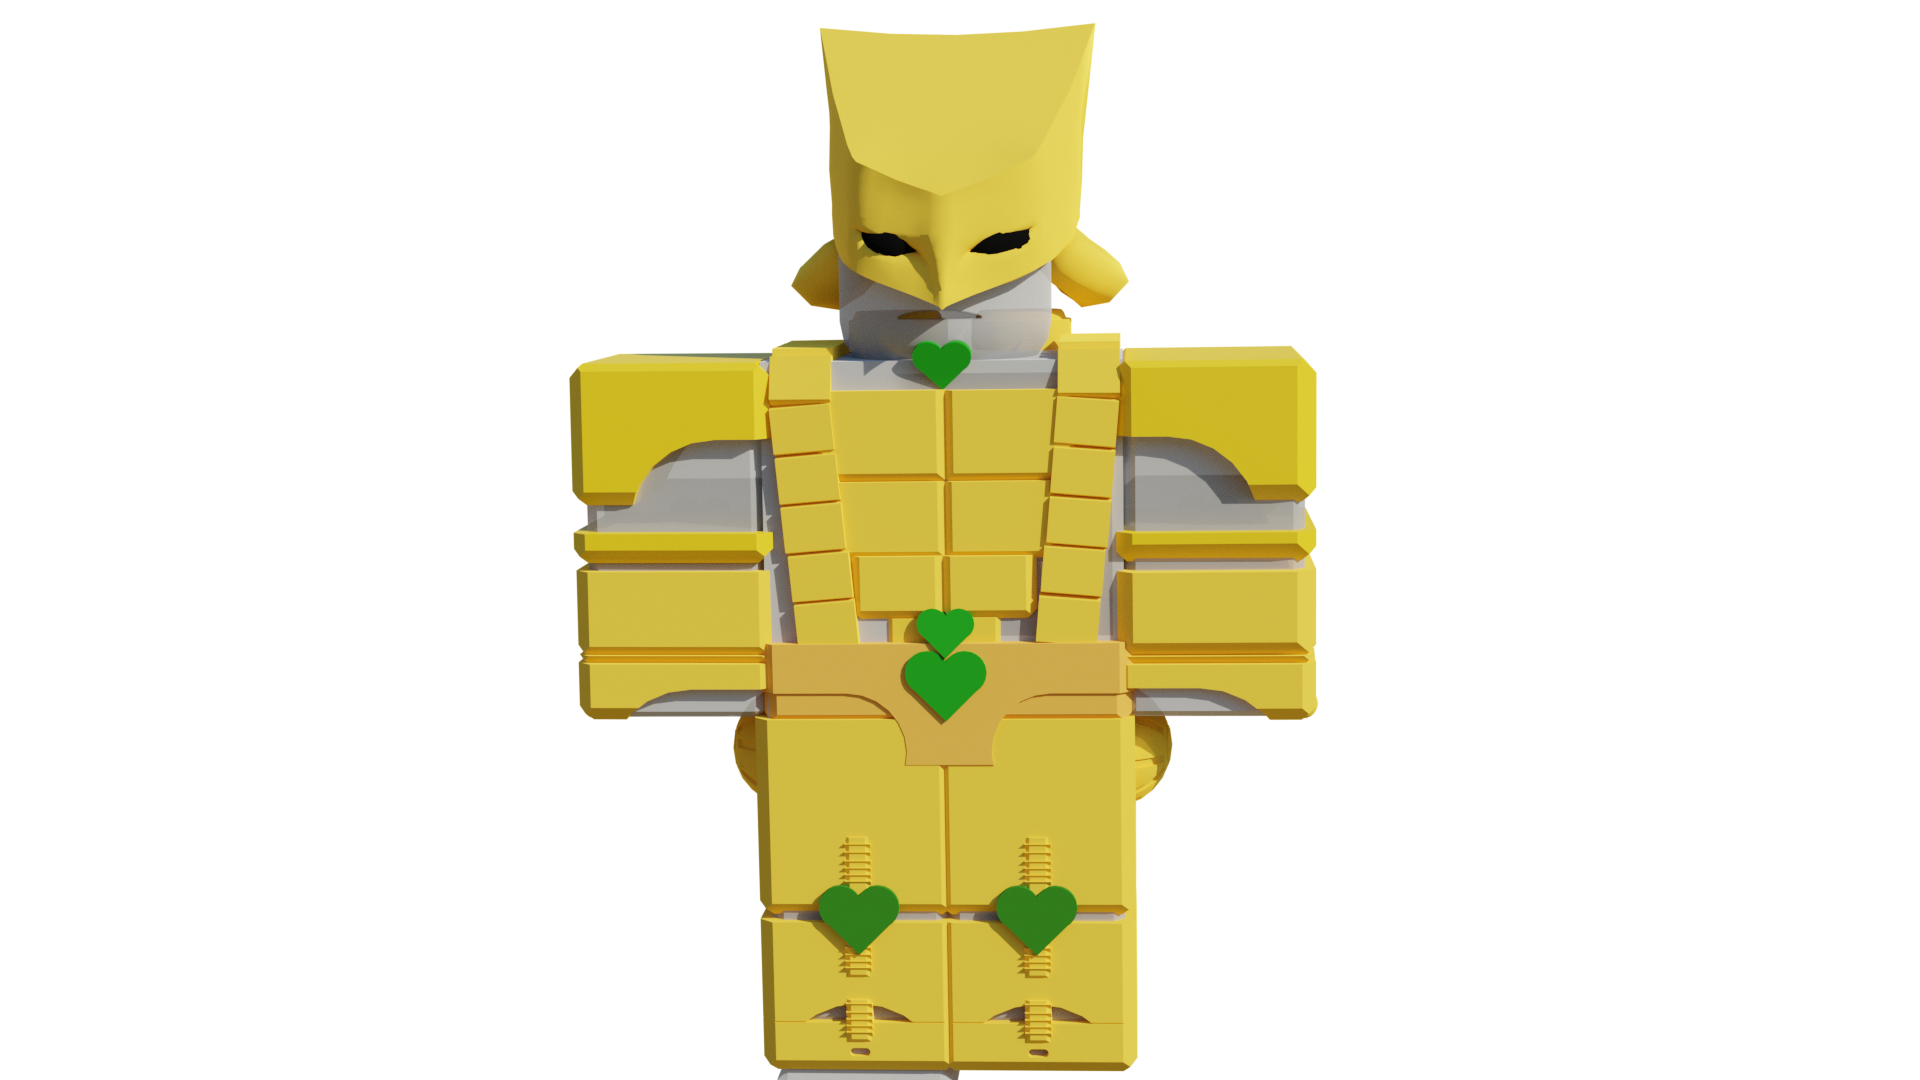 Its crazy how much stand models differ between Jojo roblox games